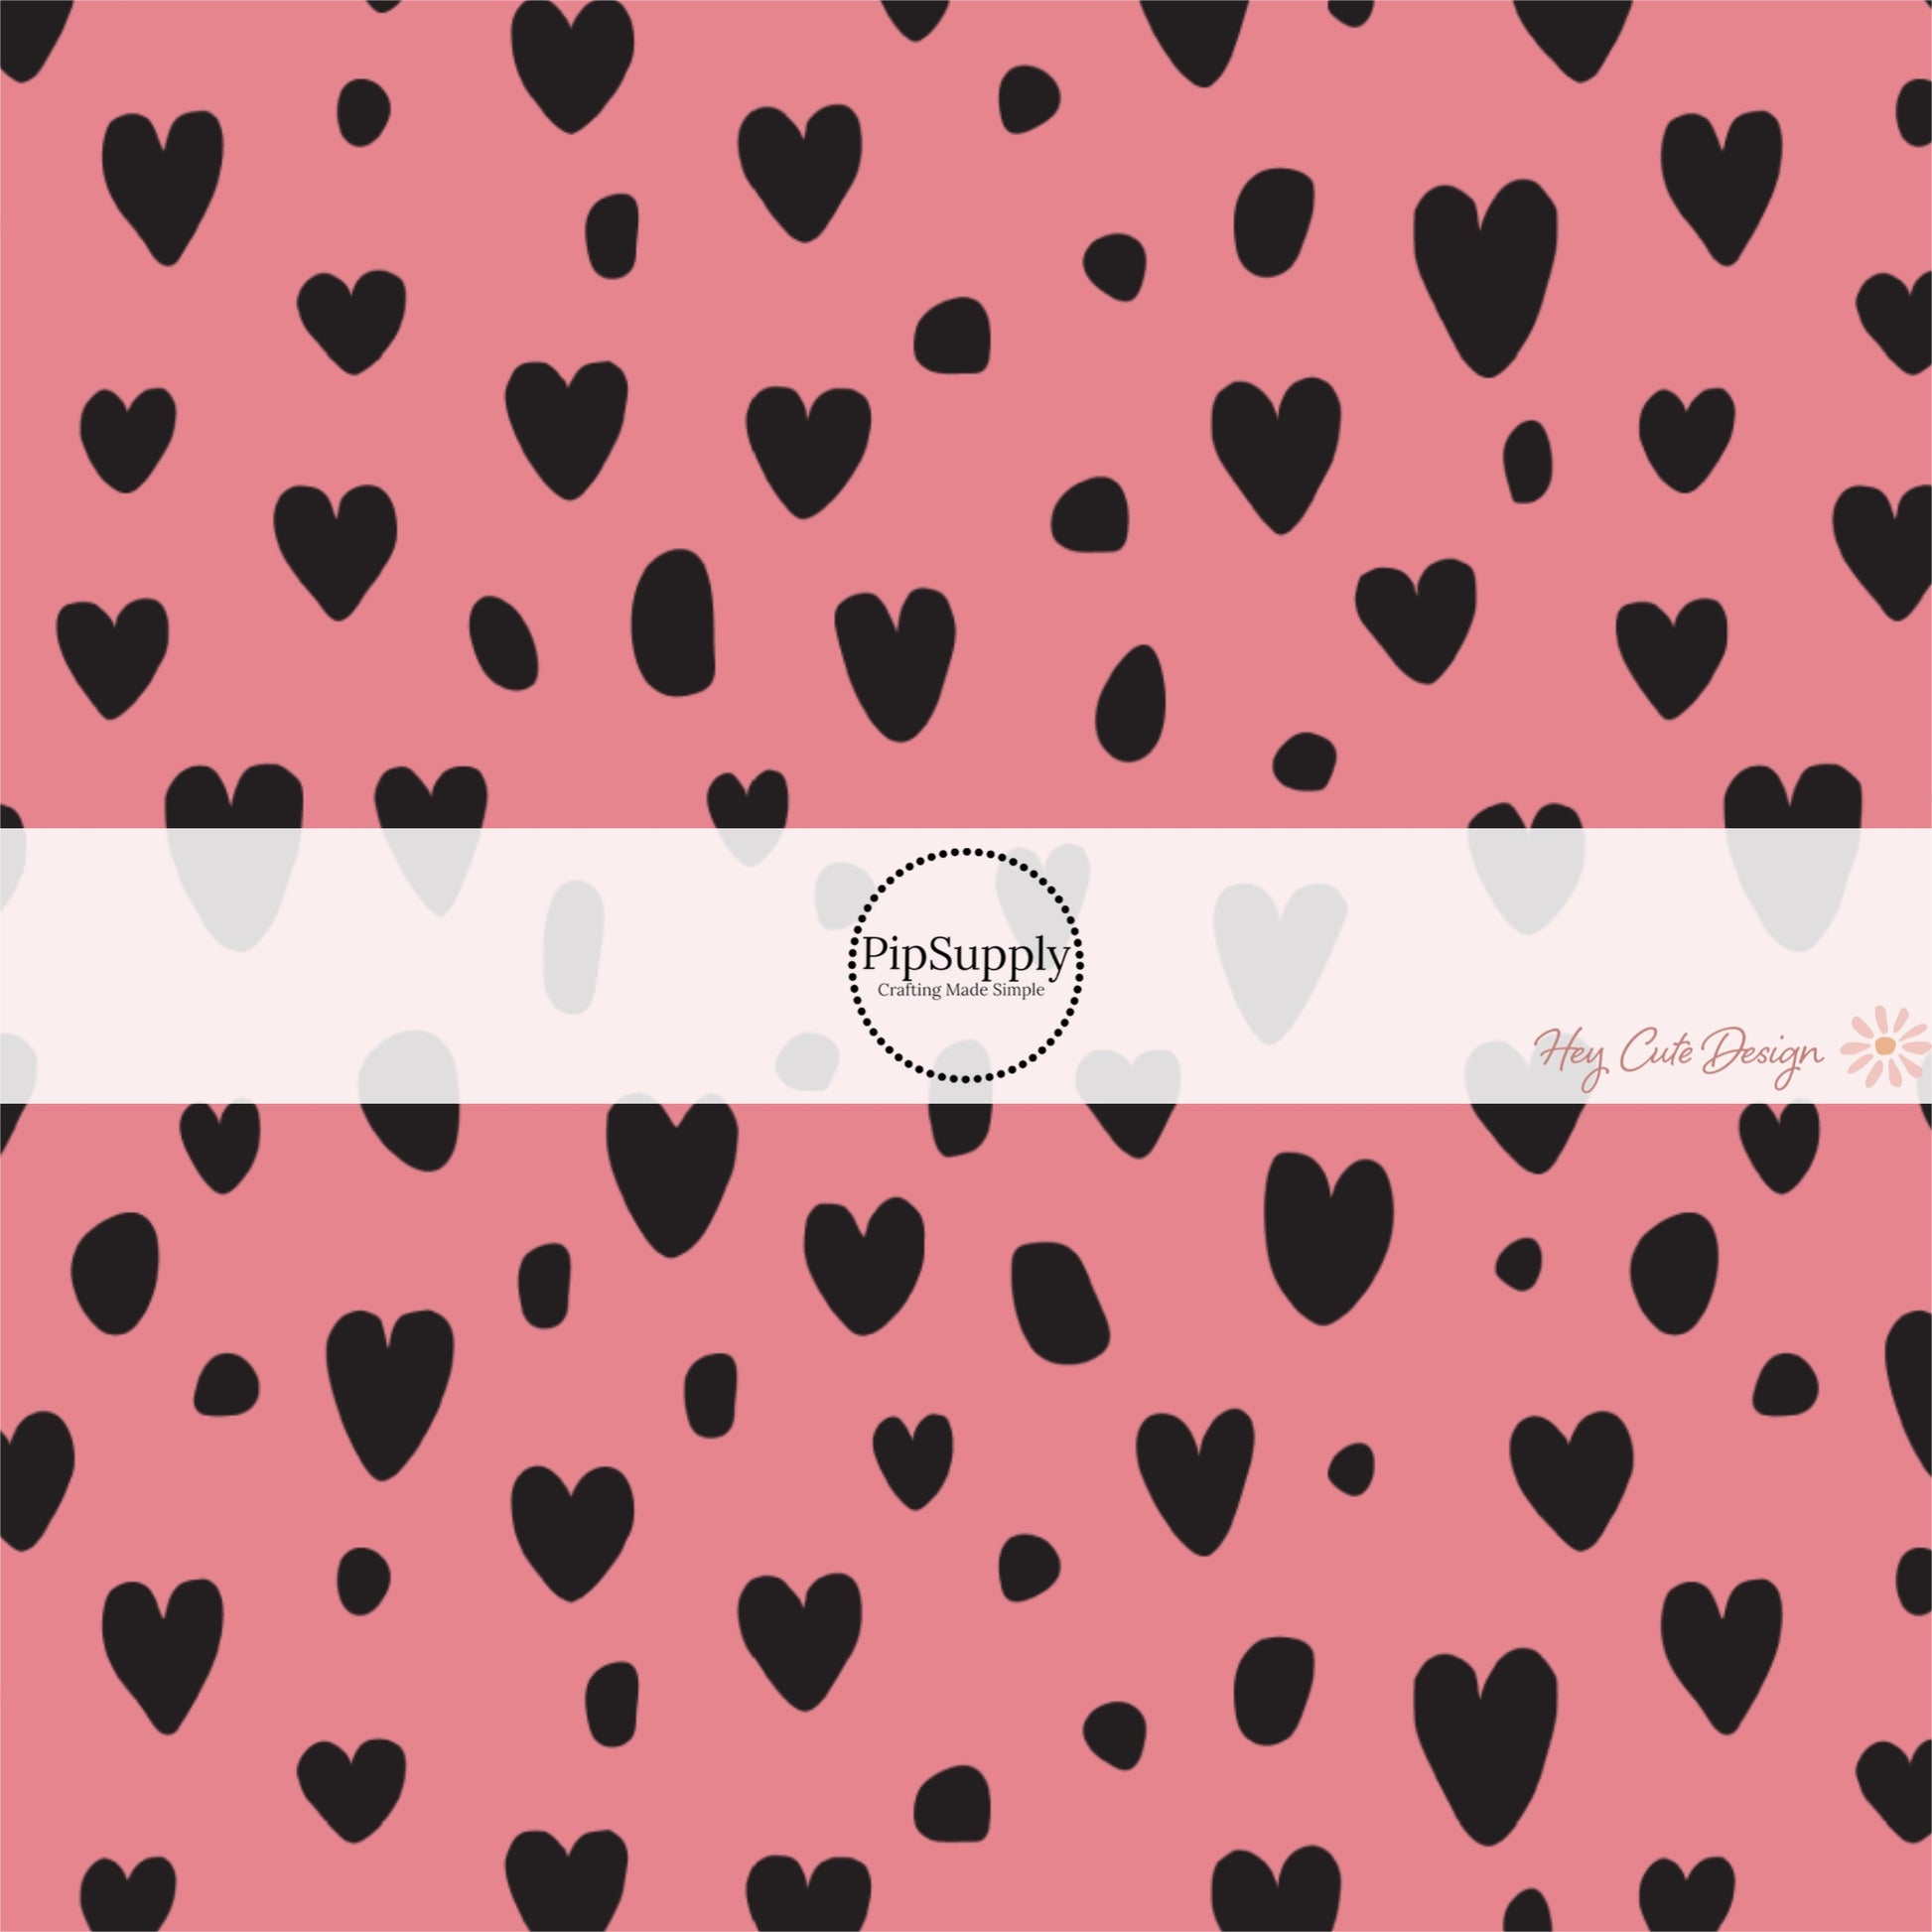 These heart and spot themed pink headband kits are easy to assemble and come with everything you need to make your own knotted headband. These fun animal themed kits with a variety hearts and spots in black on pink include a custom printed and sewn fabric strip and a coordinating velvet headband.  